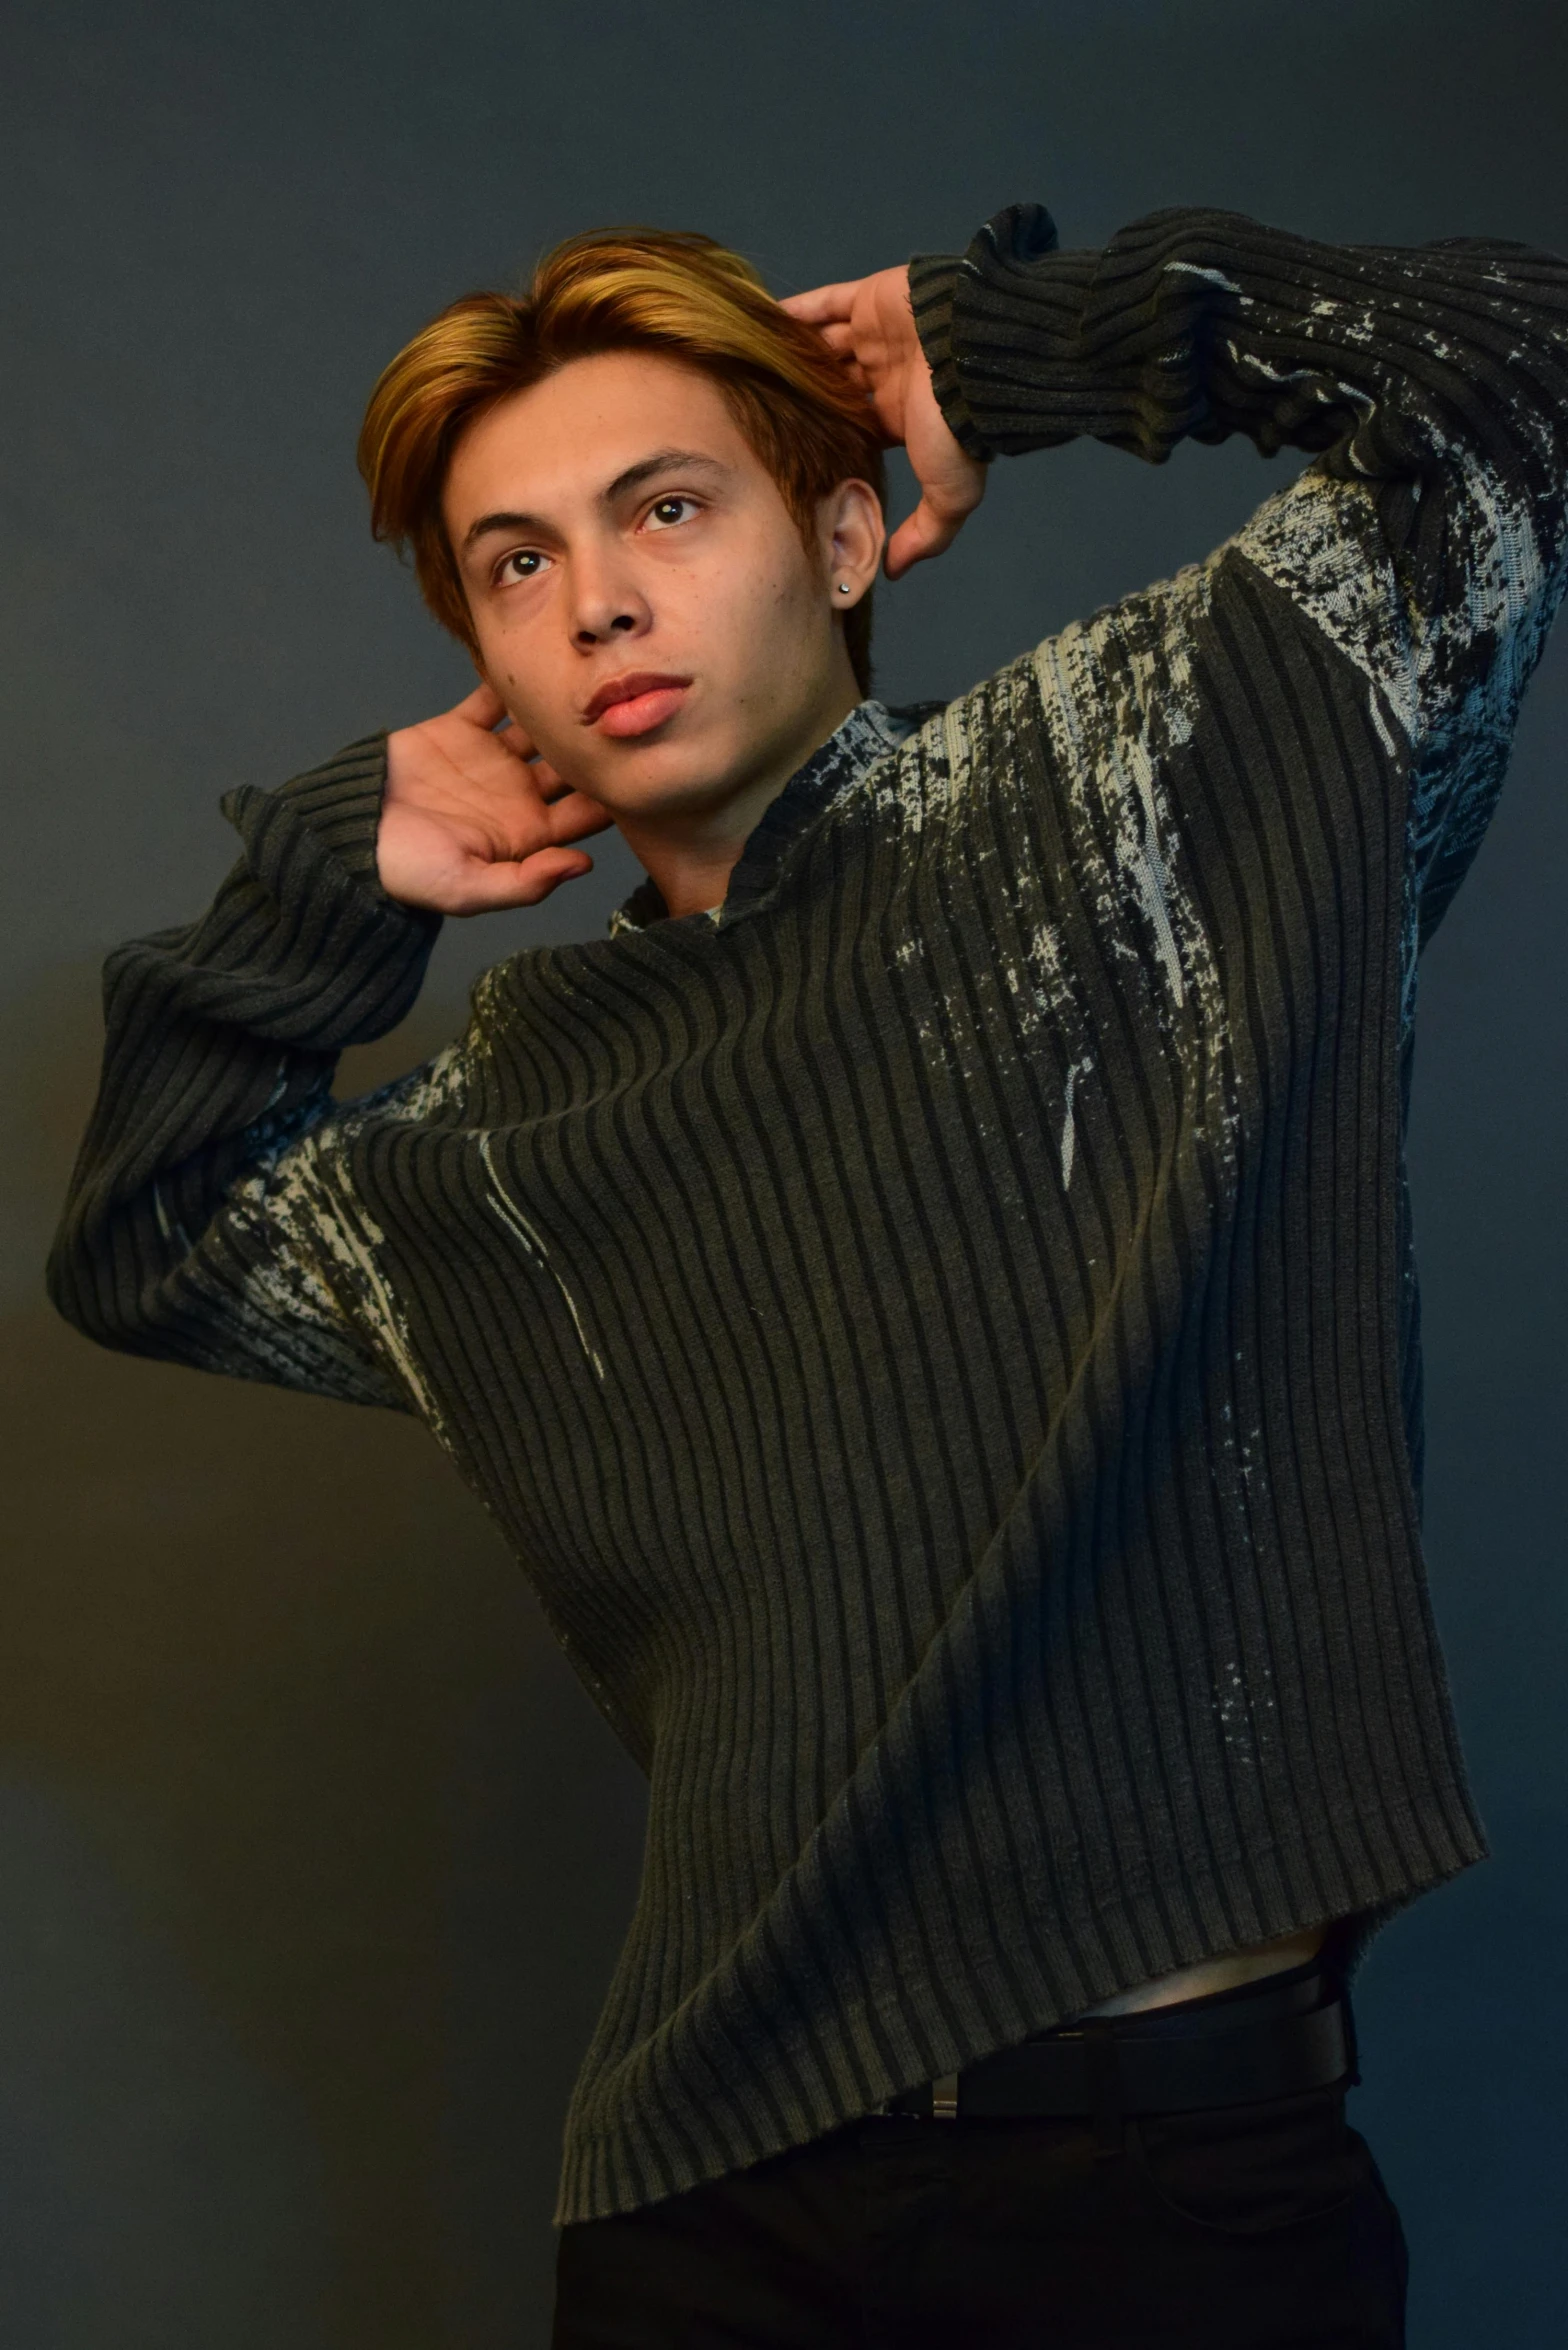 a man in a sweater posing for a picture, by Robbie Trevino, glossy and drippy, tattered clothing, promo image, male teenager